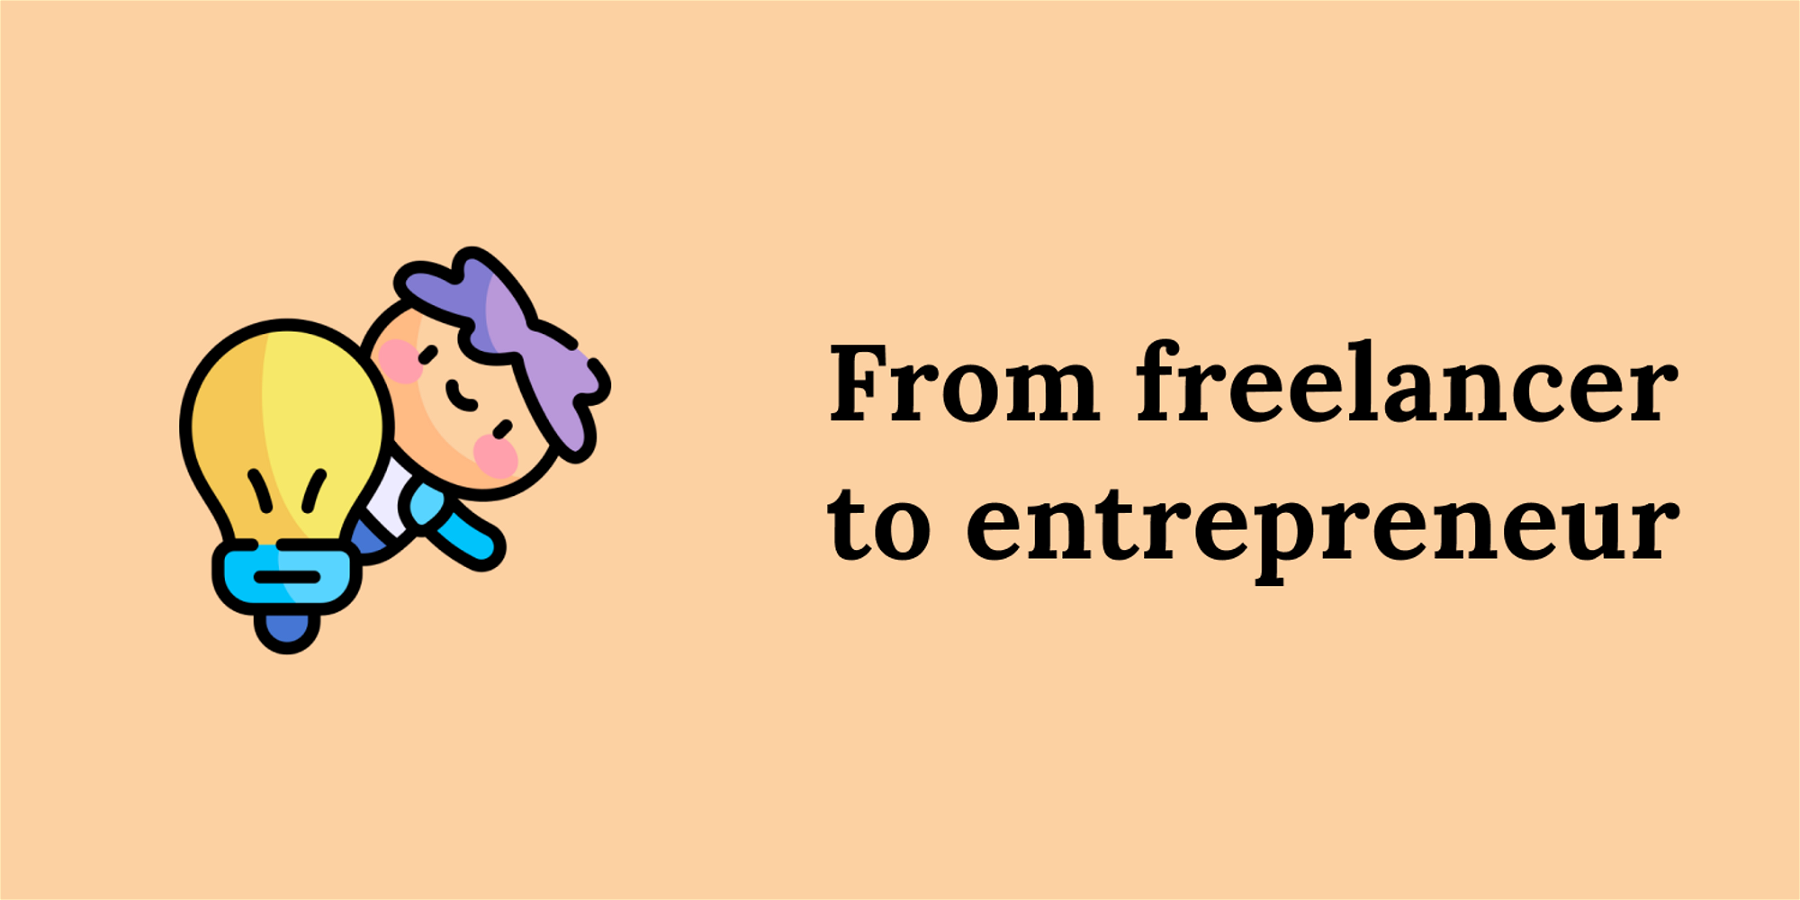 A person who starts a business or who is an entrepreneur